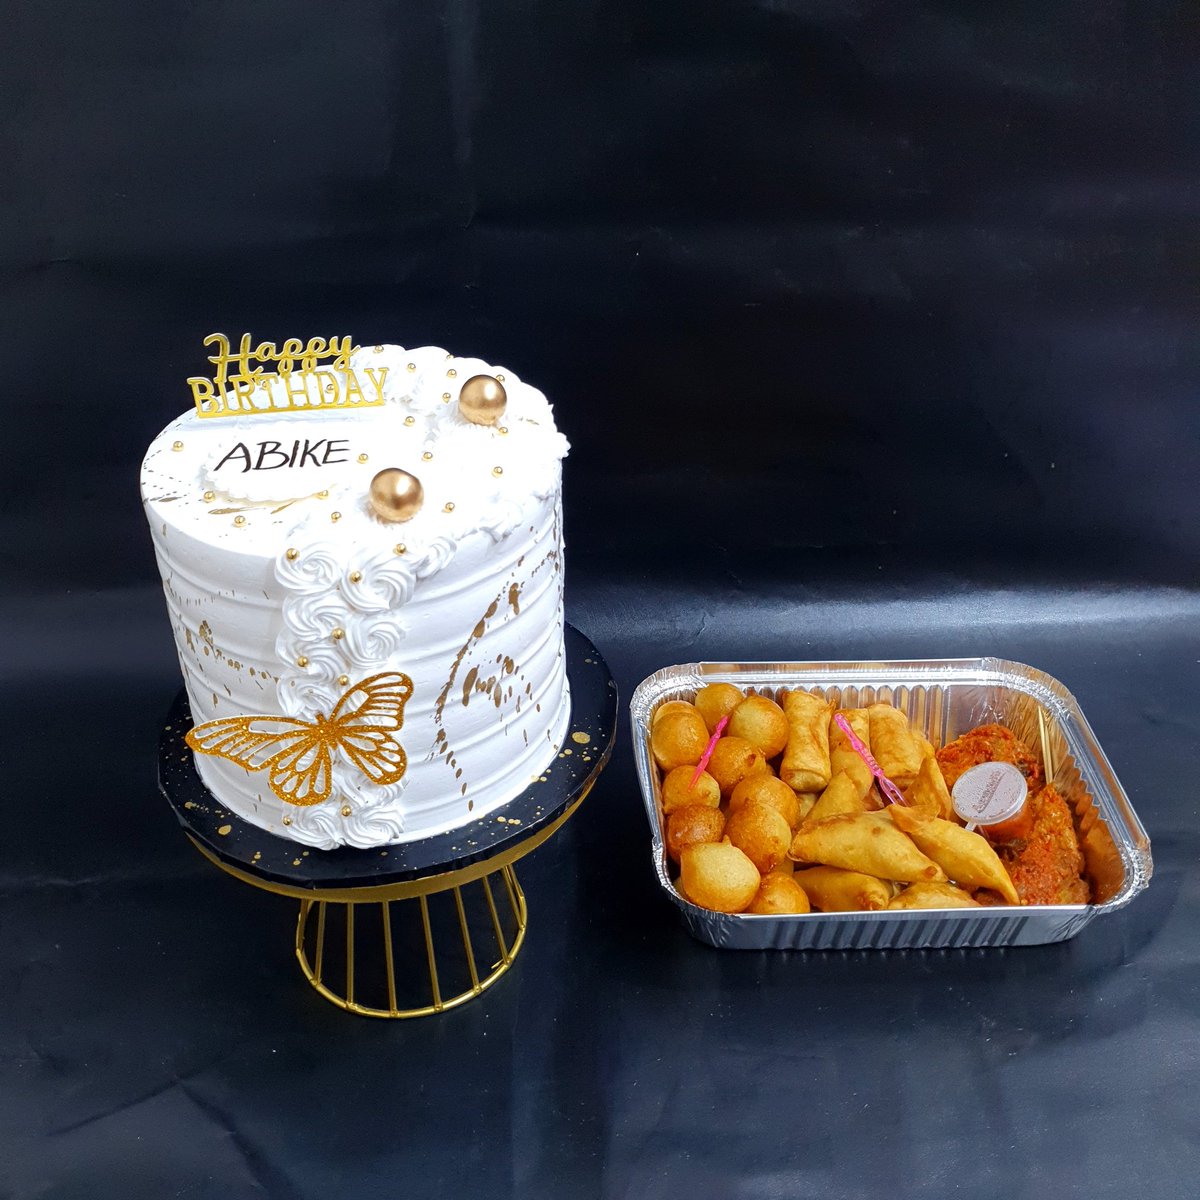 Whipped to perfection.😊 Cake description; Size 6, 2 layers. Frosting: whipped cream Price: 17,500NGN Small chops: 6000NGN Cakes and small chops are available for delivery everyday. Send a DM or use the WhatsApp link in bio or call 08147592582 for order placement.